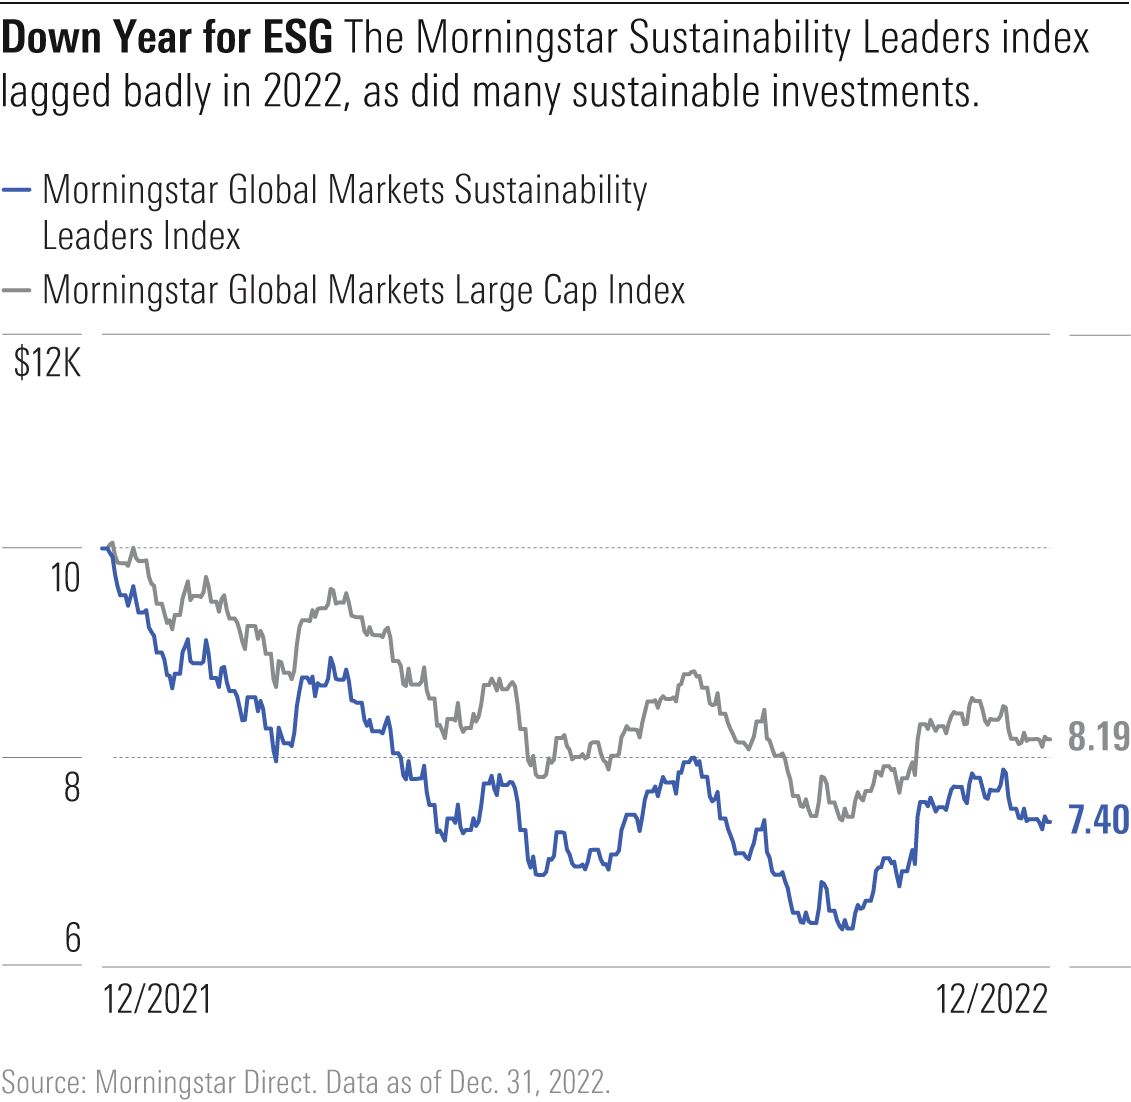 Line chart shows that the Morningstar Sustainability Leaders index declined more than the Morningstar Global Markets Large Cap Index.